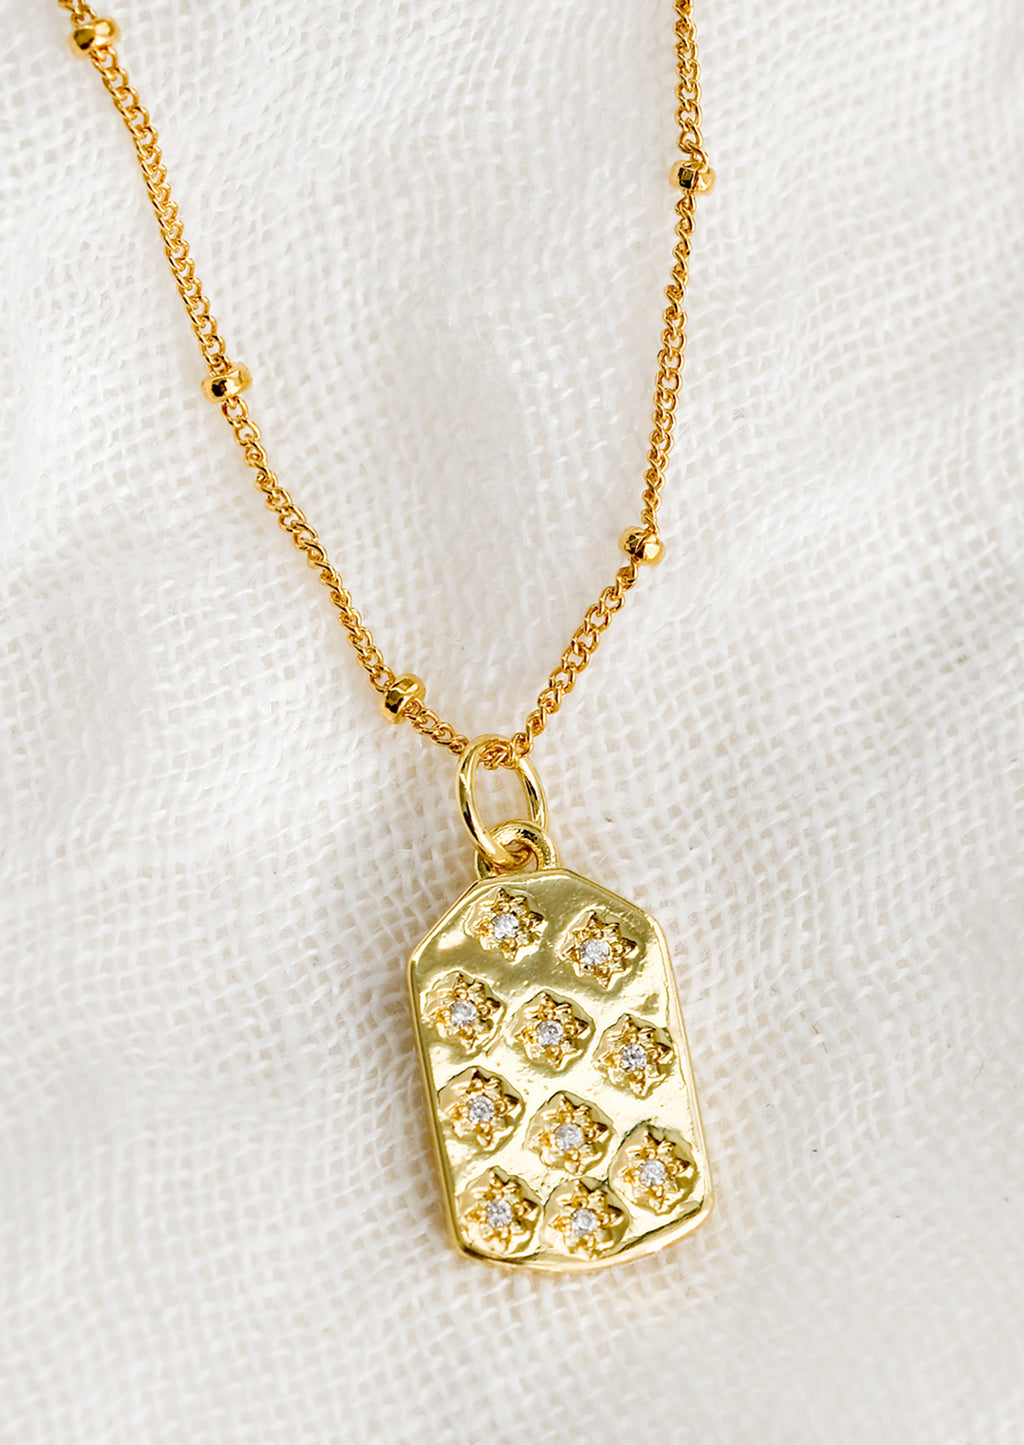 1: A gold tag charm necklace with crystal pave star detailing.